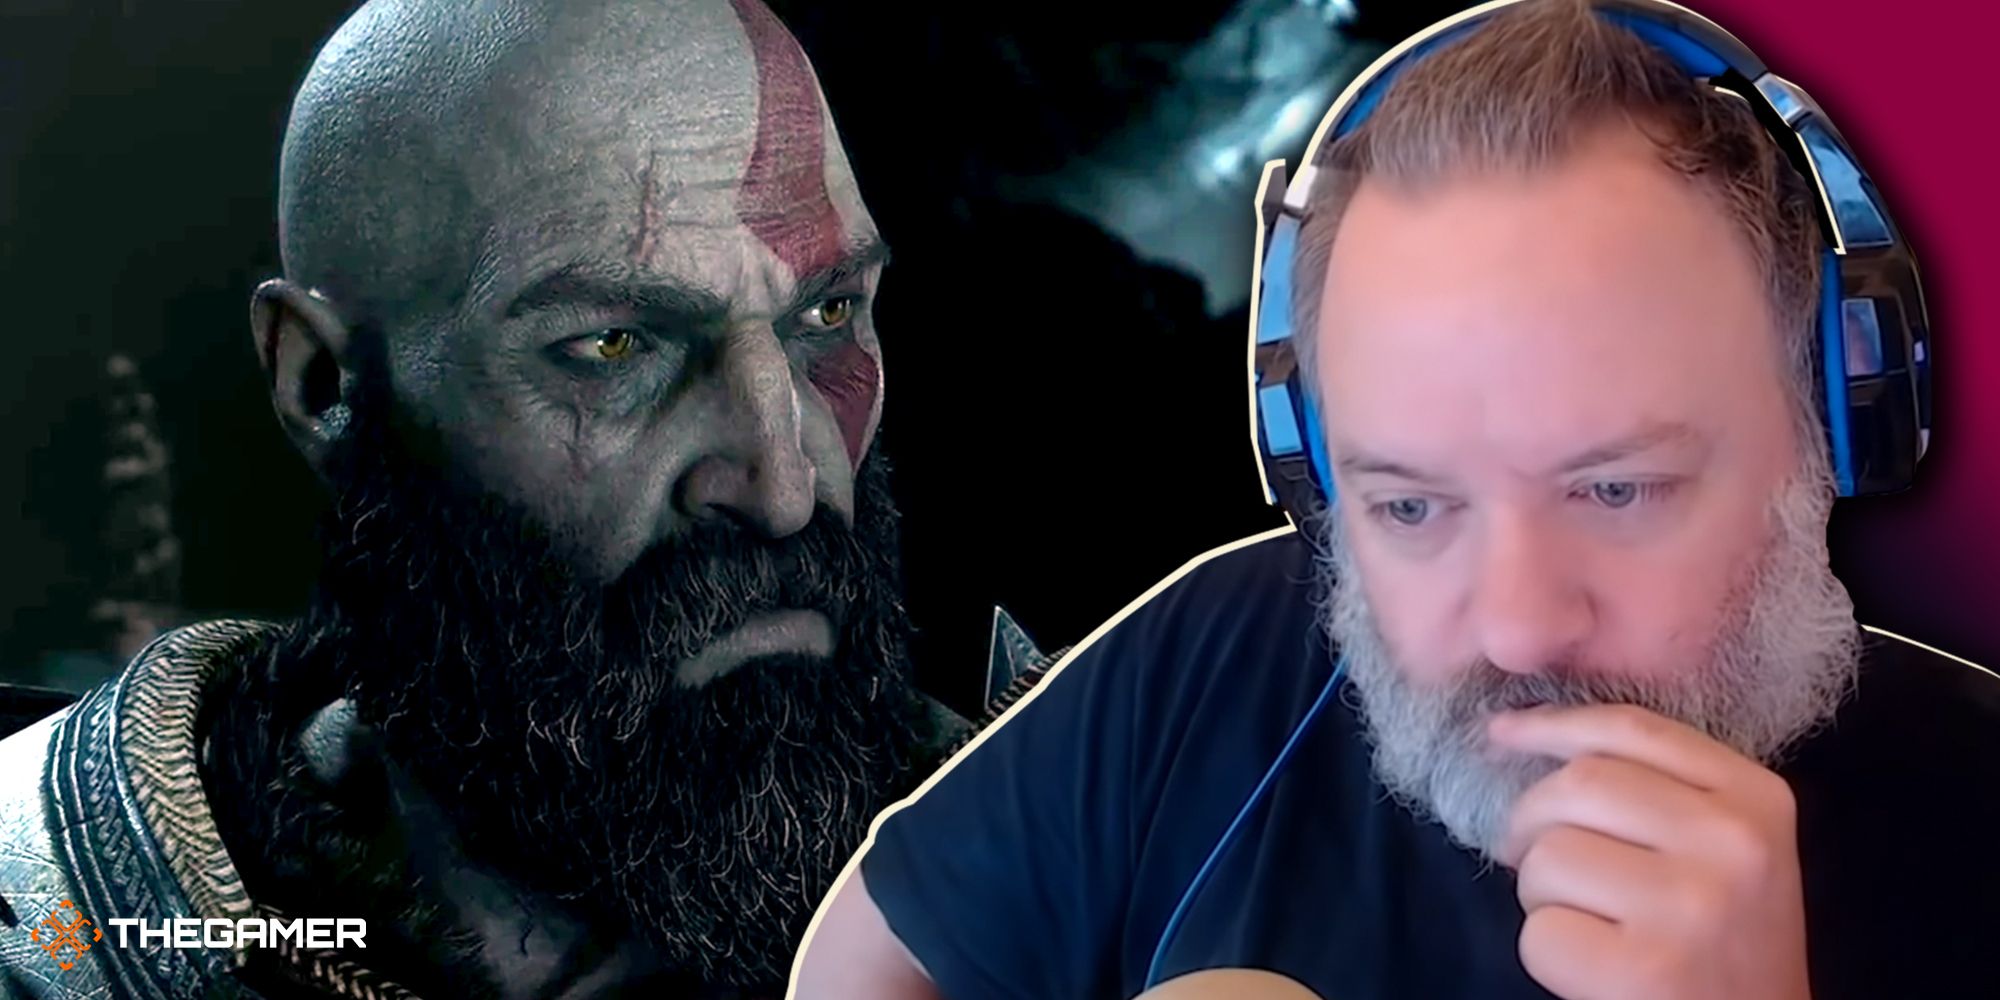 On the left, Kratos as portrayed in the recent God of War games. On the right, David Jaffe in one of his YouTube videos.